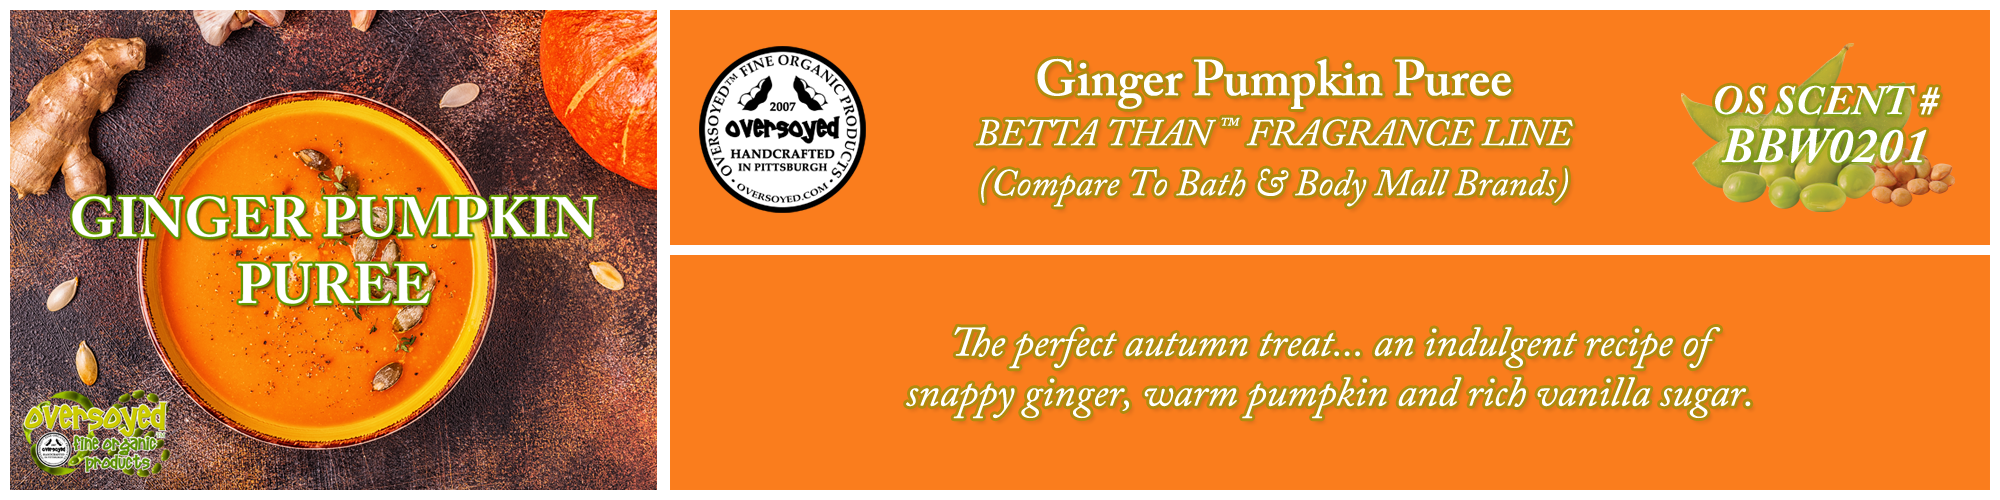 Ginger Pumpkin Puree Handcrafted Products Collection